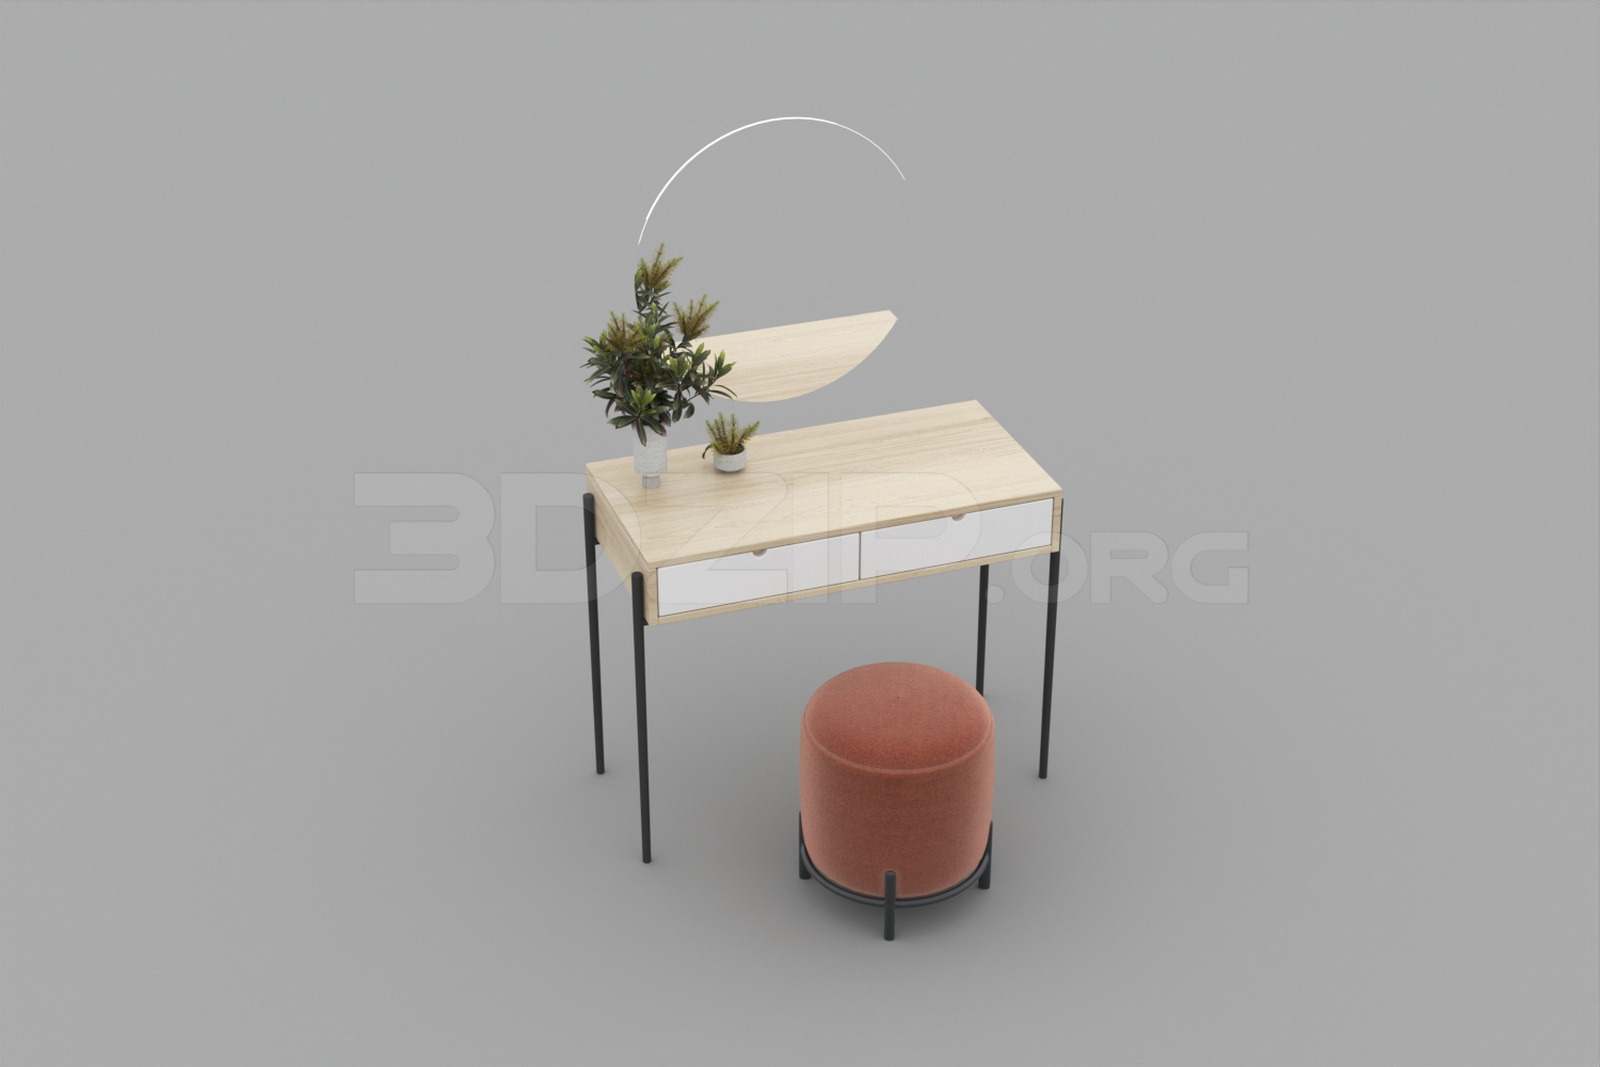 715. Download Free Dressing Table Model By Tuan An